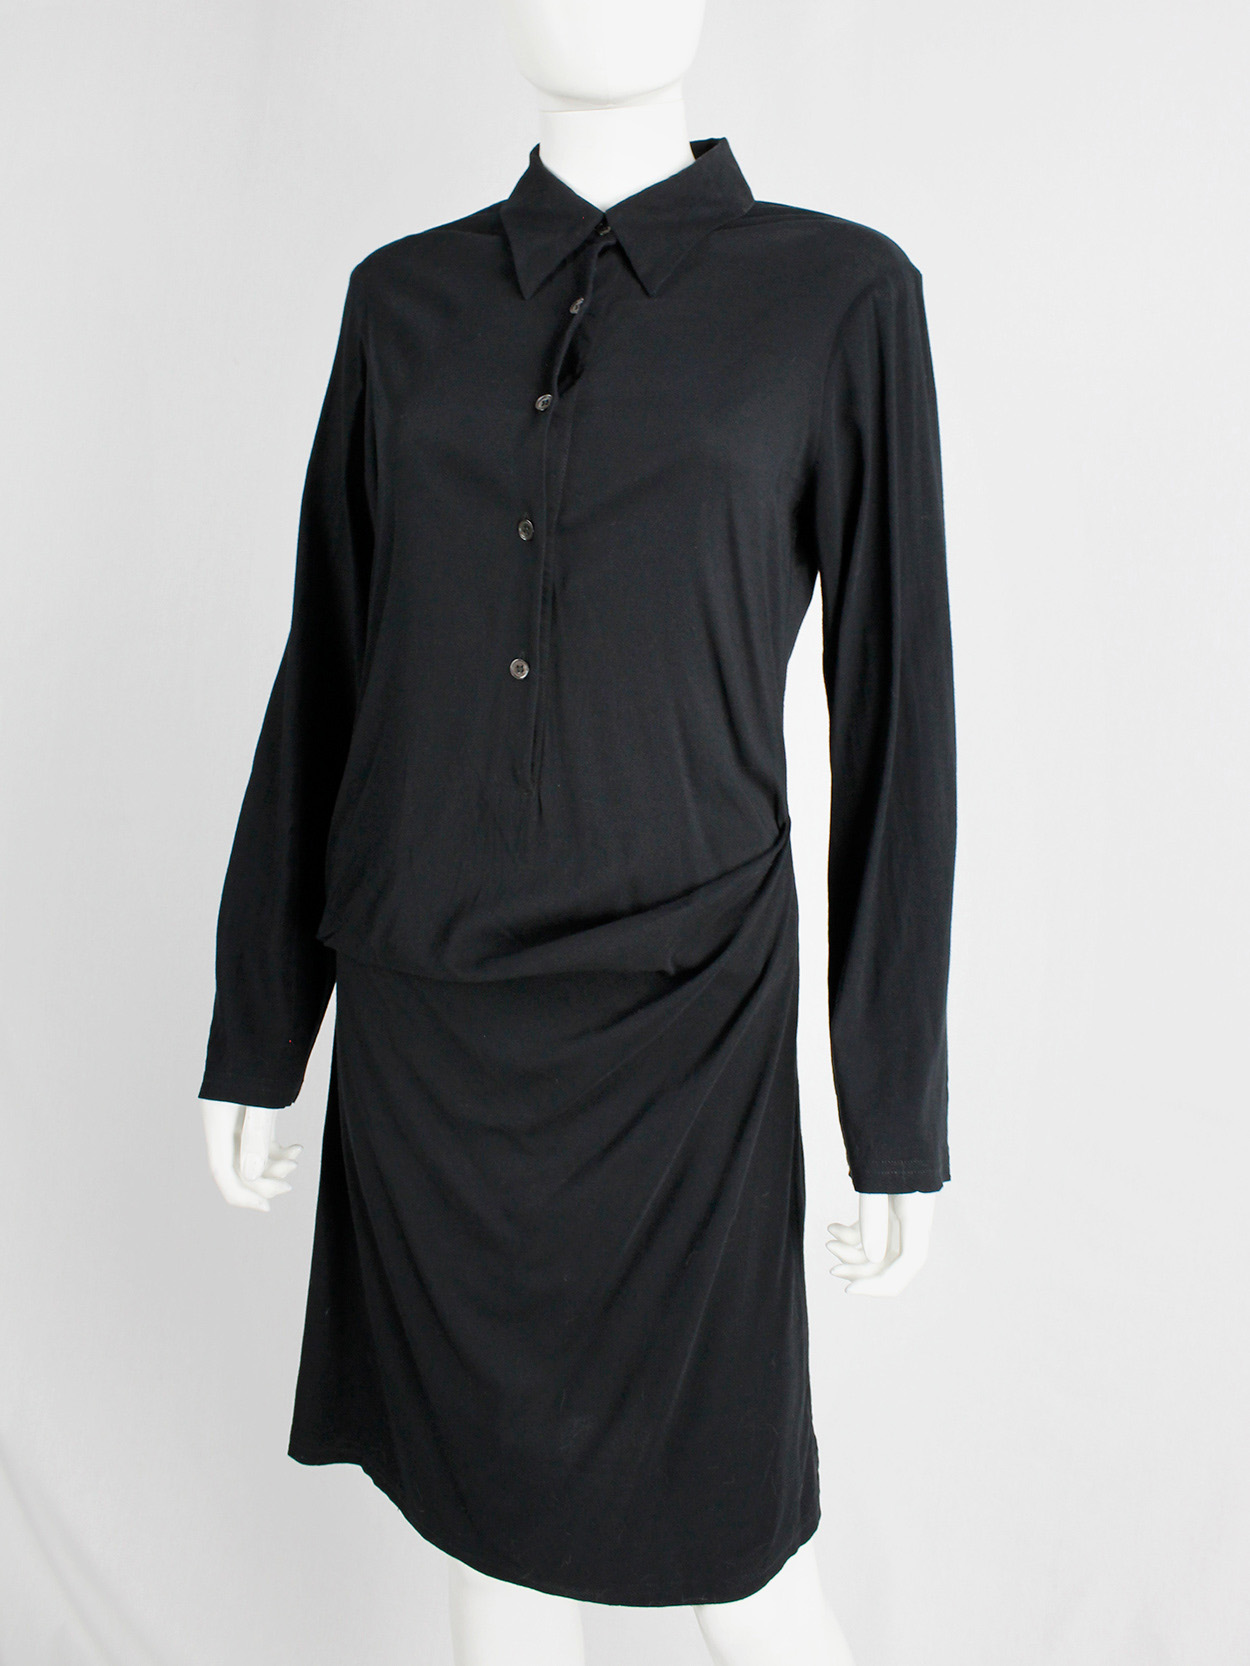 Ann Demeulemeester black shirtdress with drape at the hip - V A N II T A S